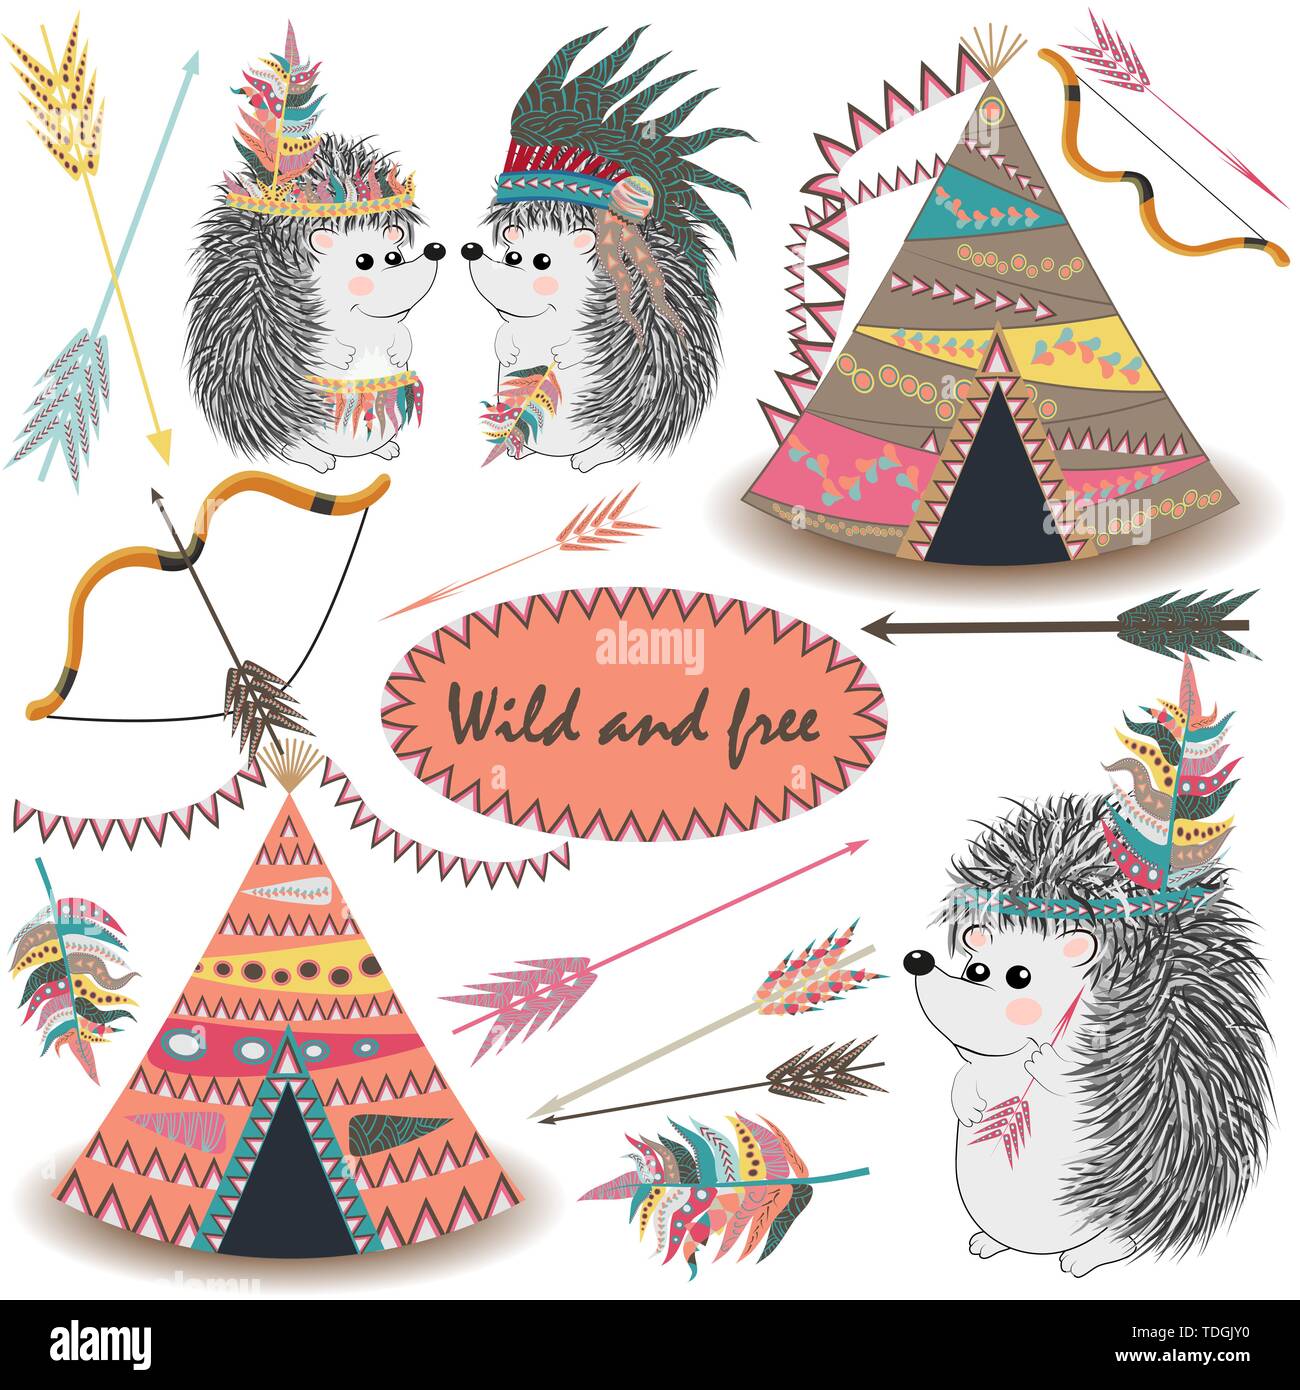 Tribal Collections Set with teepee tens, arrows, feathers, tribal borders, Indian hedgehog and feather headdress. Stock Vector